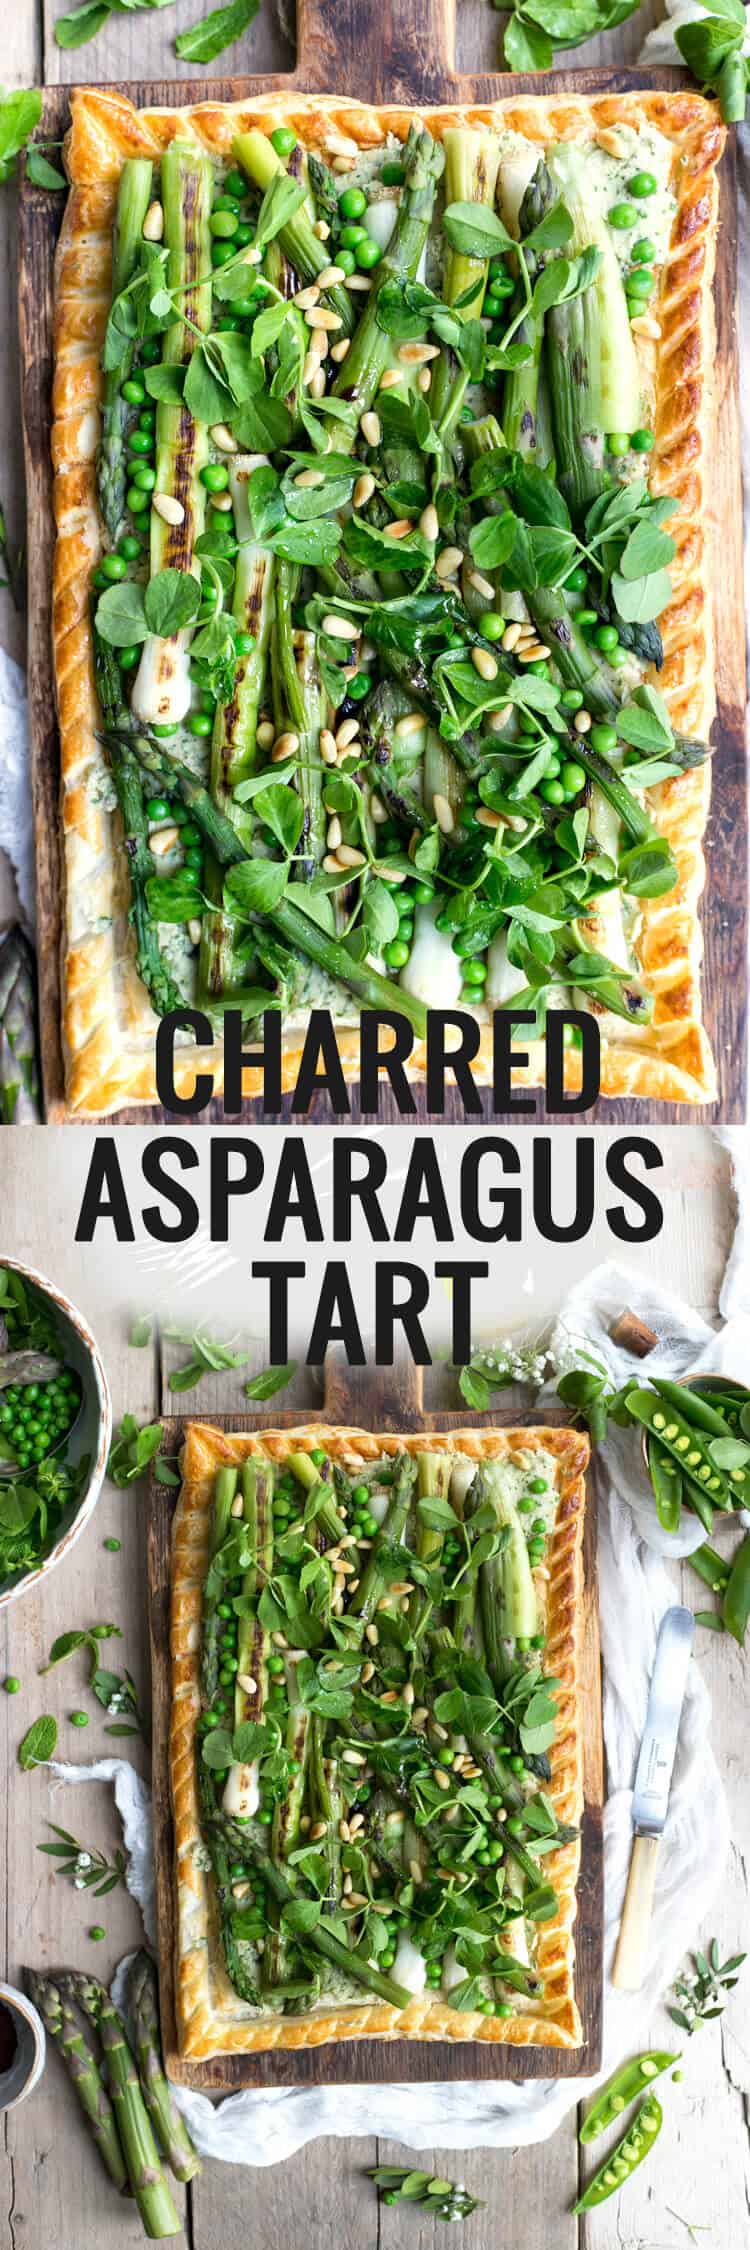 Charred Asparagus Tart with baby leeks, pea shoots and butter bean paste | via @annabanana.co